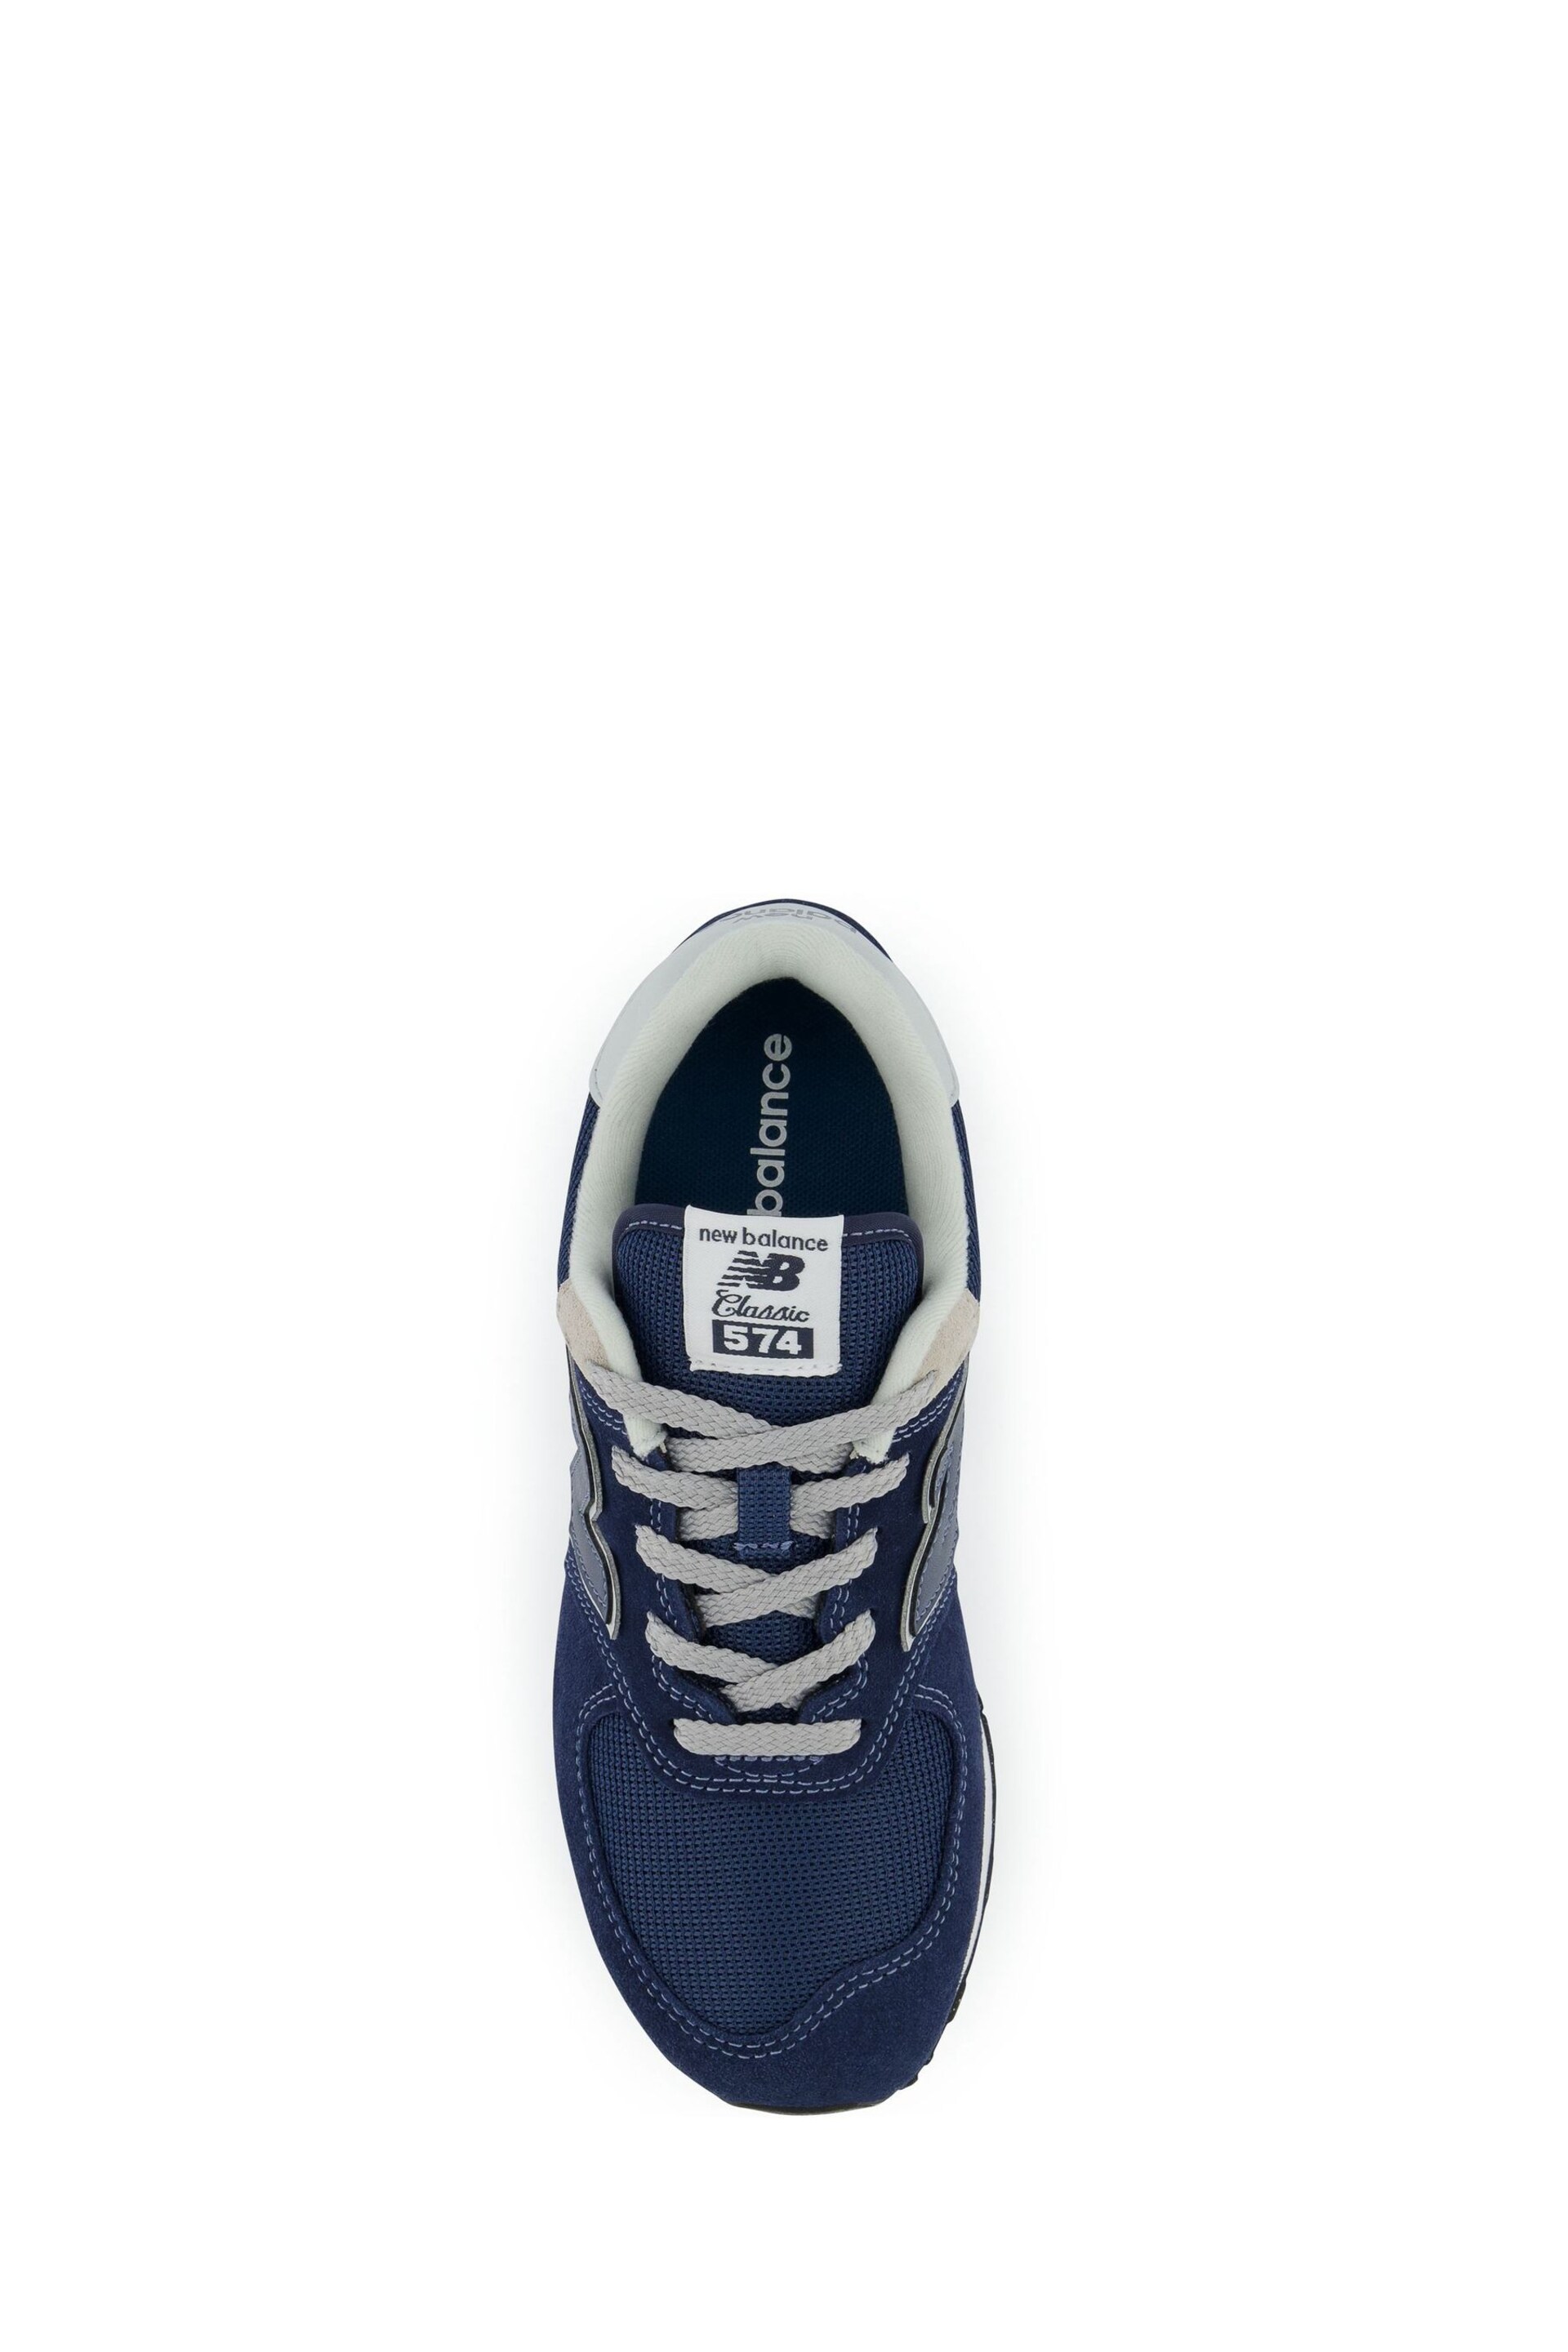 New Balance Blue Boys 574 Trainers - Image 6 of 7